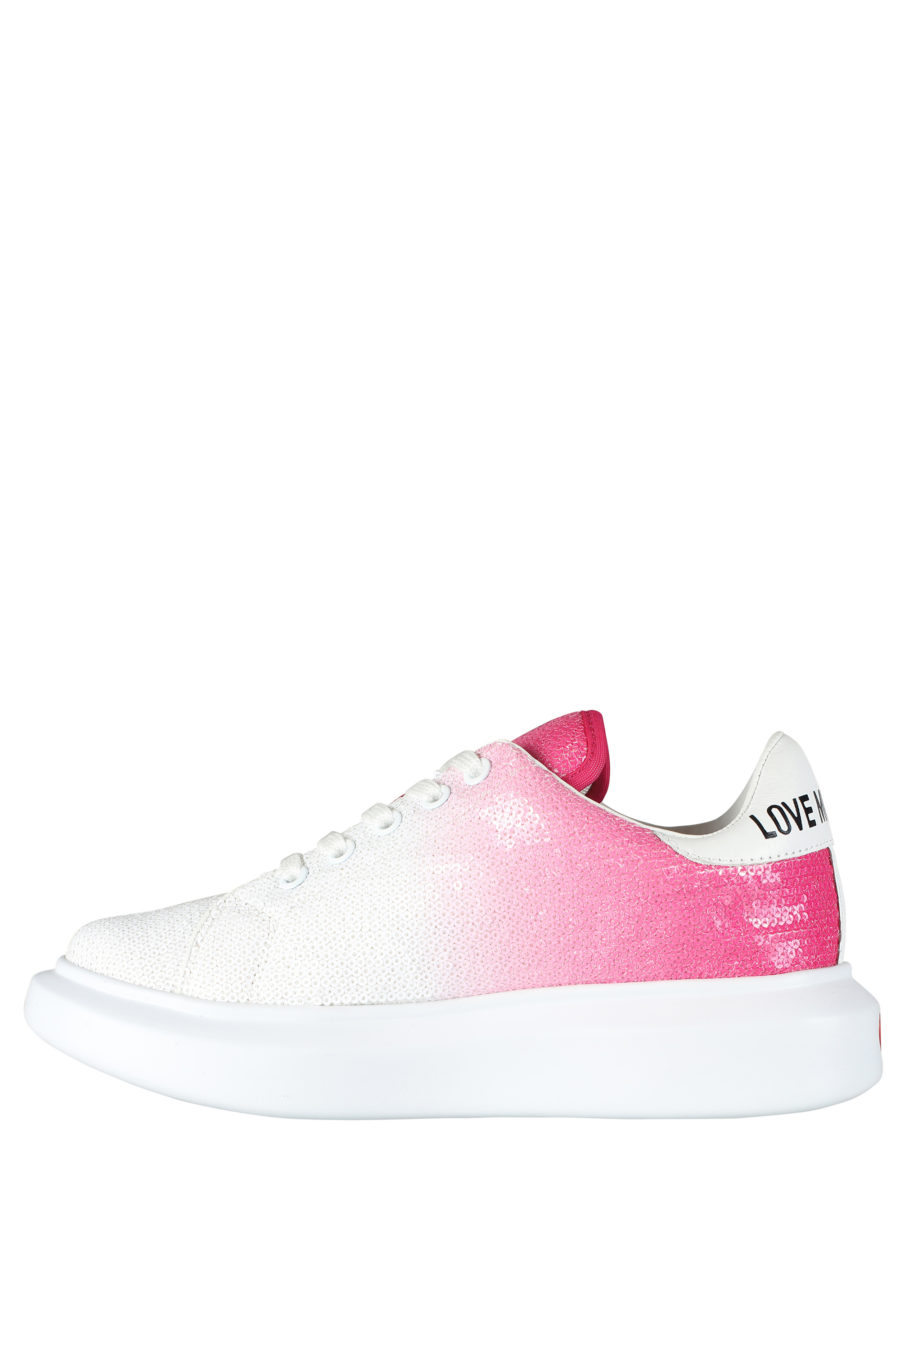 White trainers with pink gradient and sequins - IMG 5264